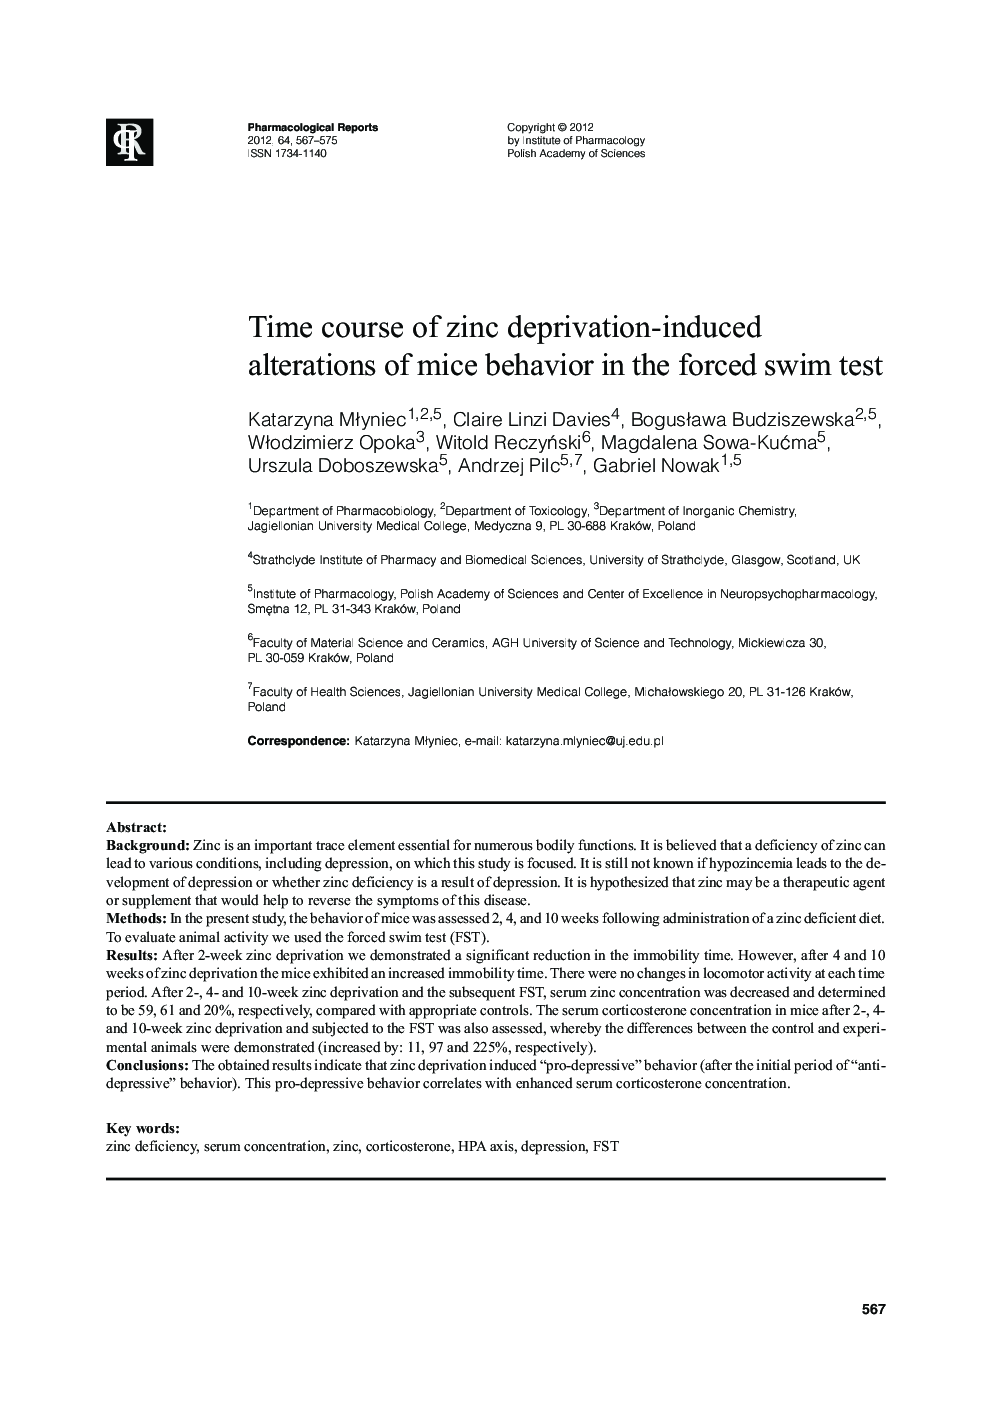 Time course of zinc deprivation-induced alterations of mice behavior in the forced swim test